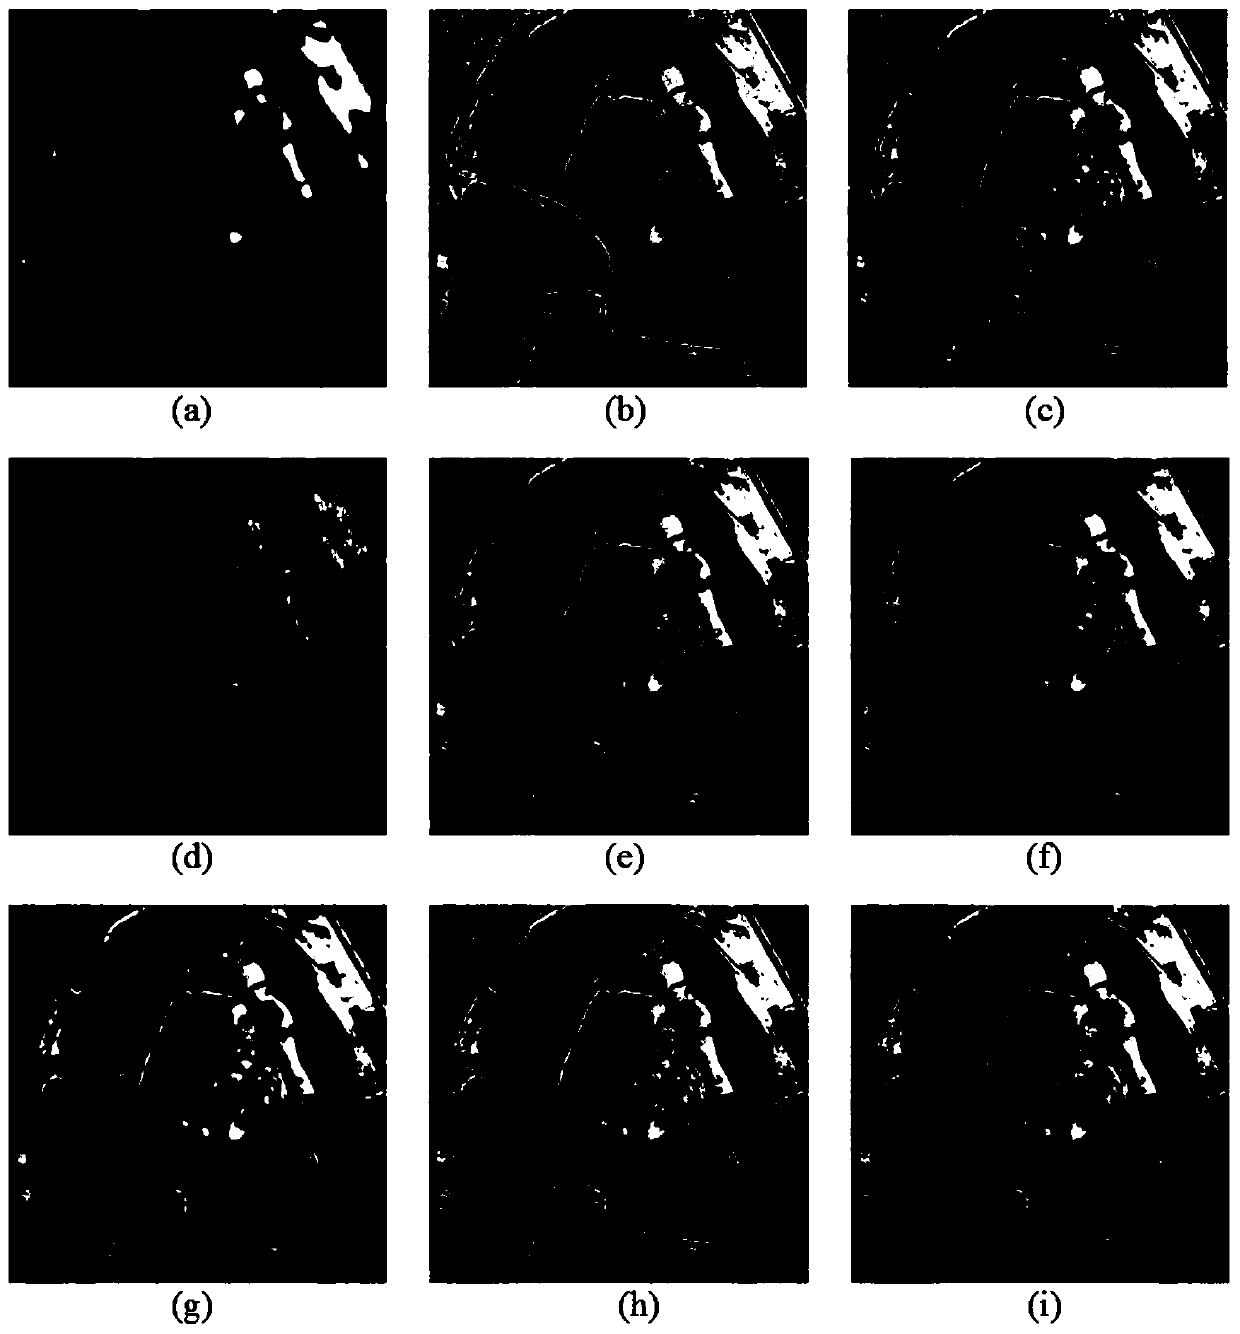 A remote sensing image fusion method based on a dual-channel neural network